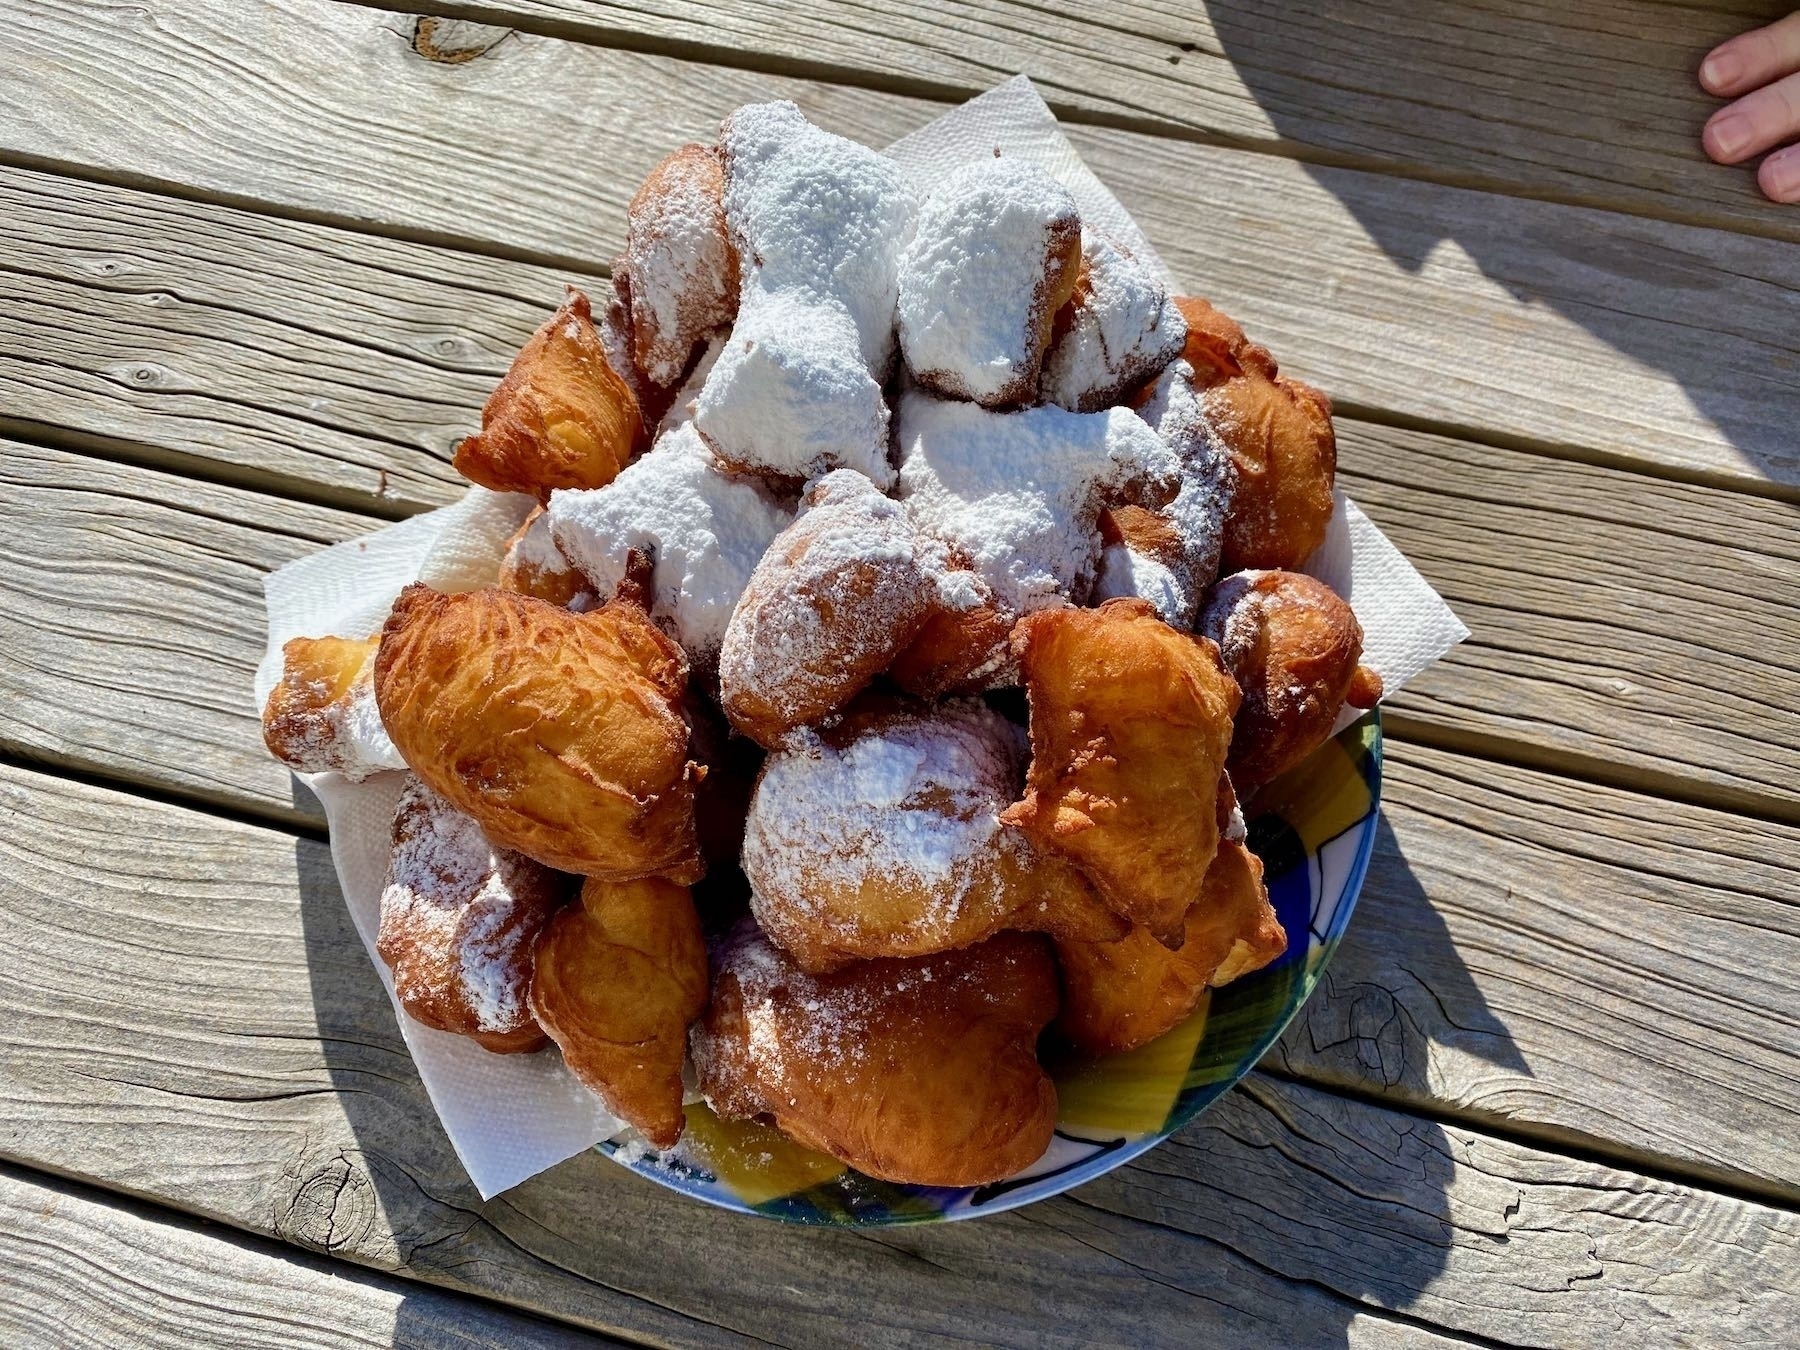 A plate of beignets sprinkled with icing sugar. 